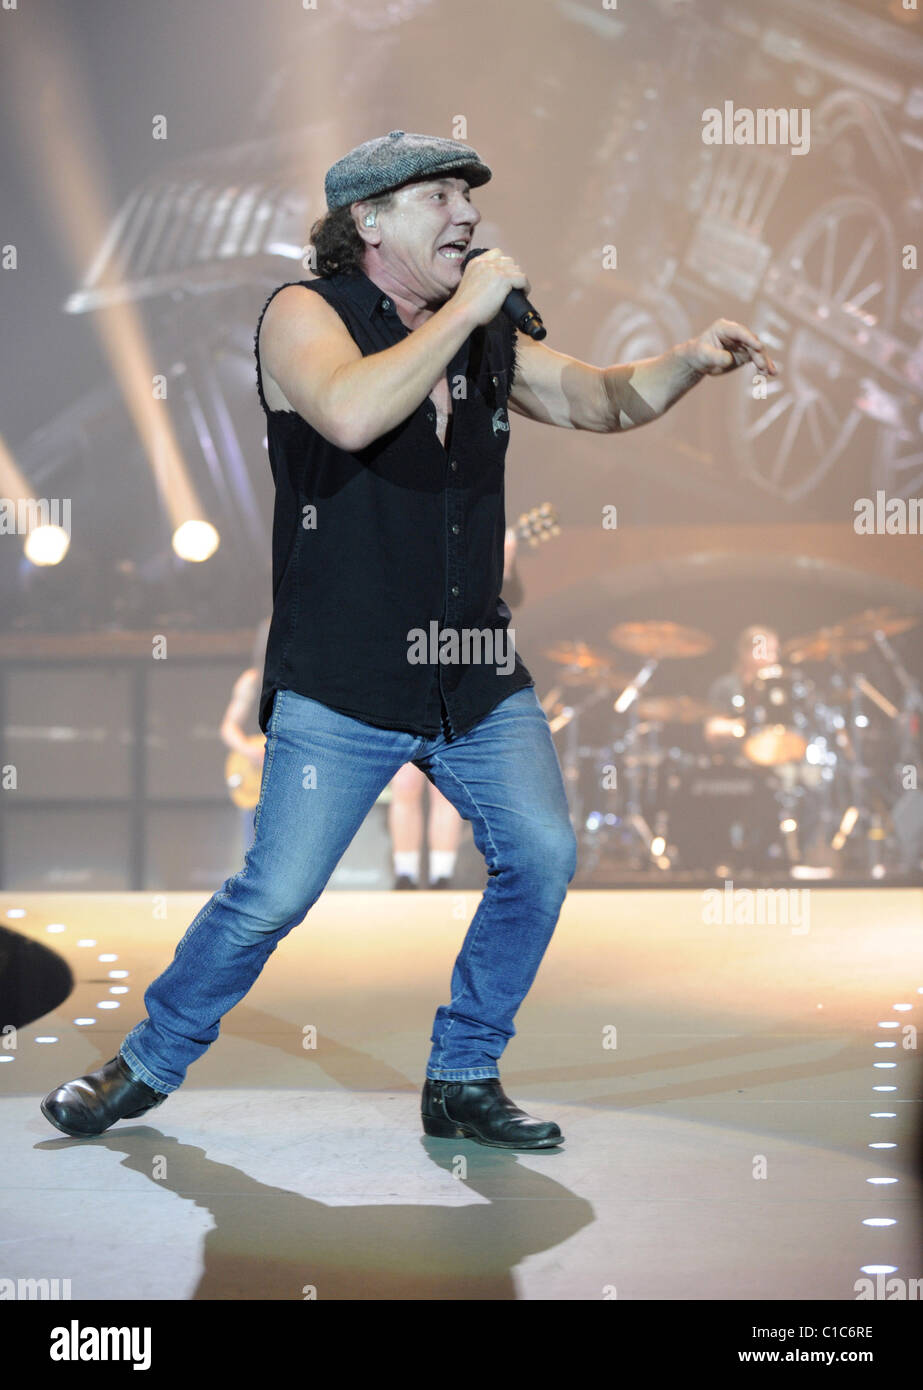 Brian Johnson AC DC performing live at the O2 Arena London, England -  14.04.09 Stock Photo - Alamy